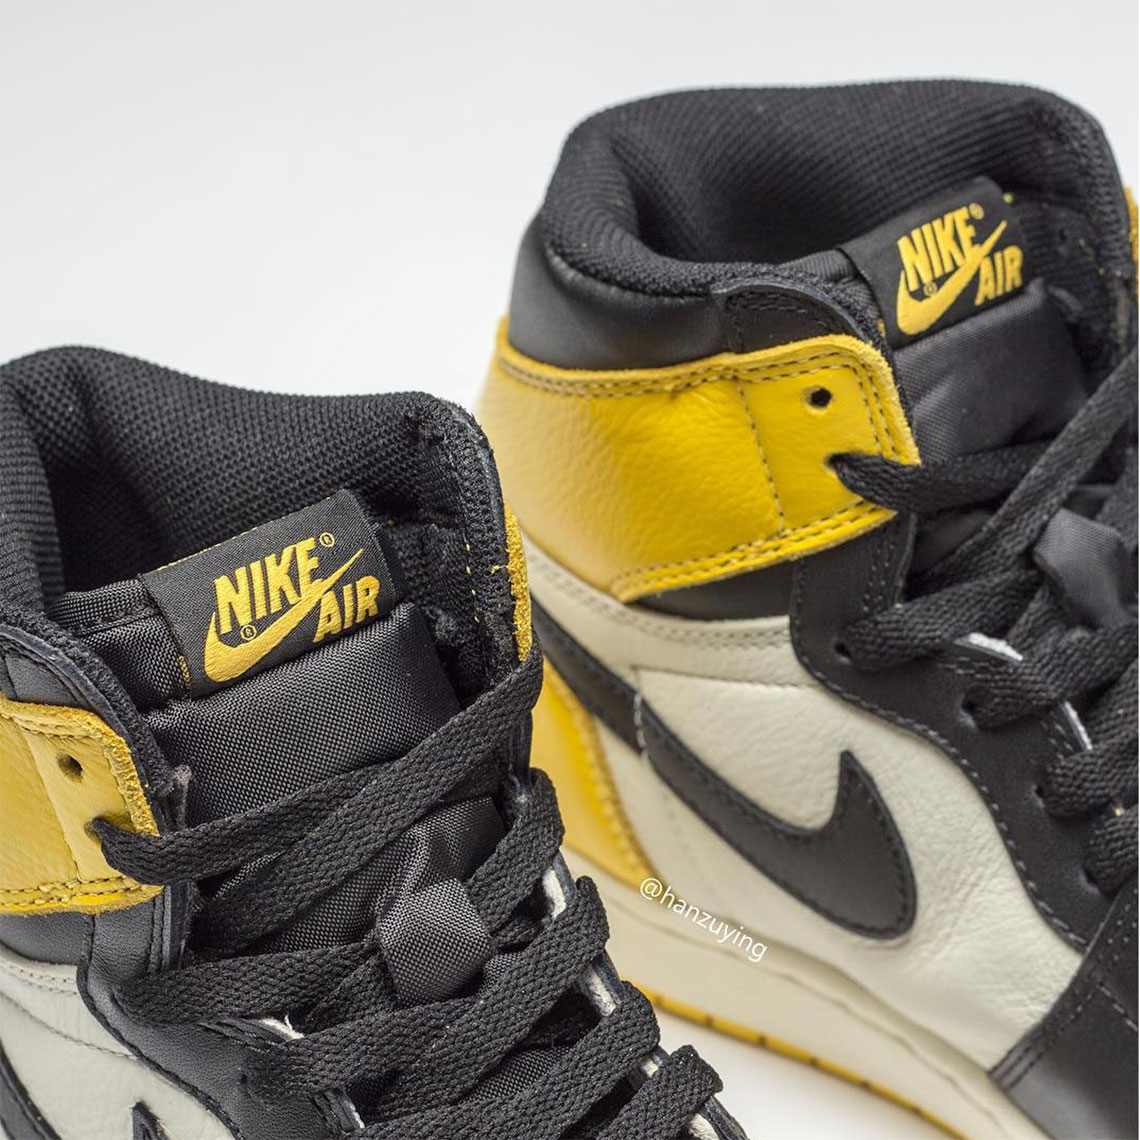 the Air Jordan 1 won t be the only silhouette Yellow Toe Ar1020 700 8